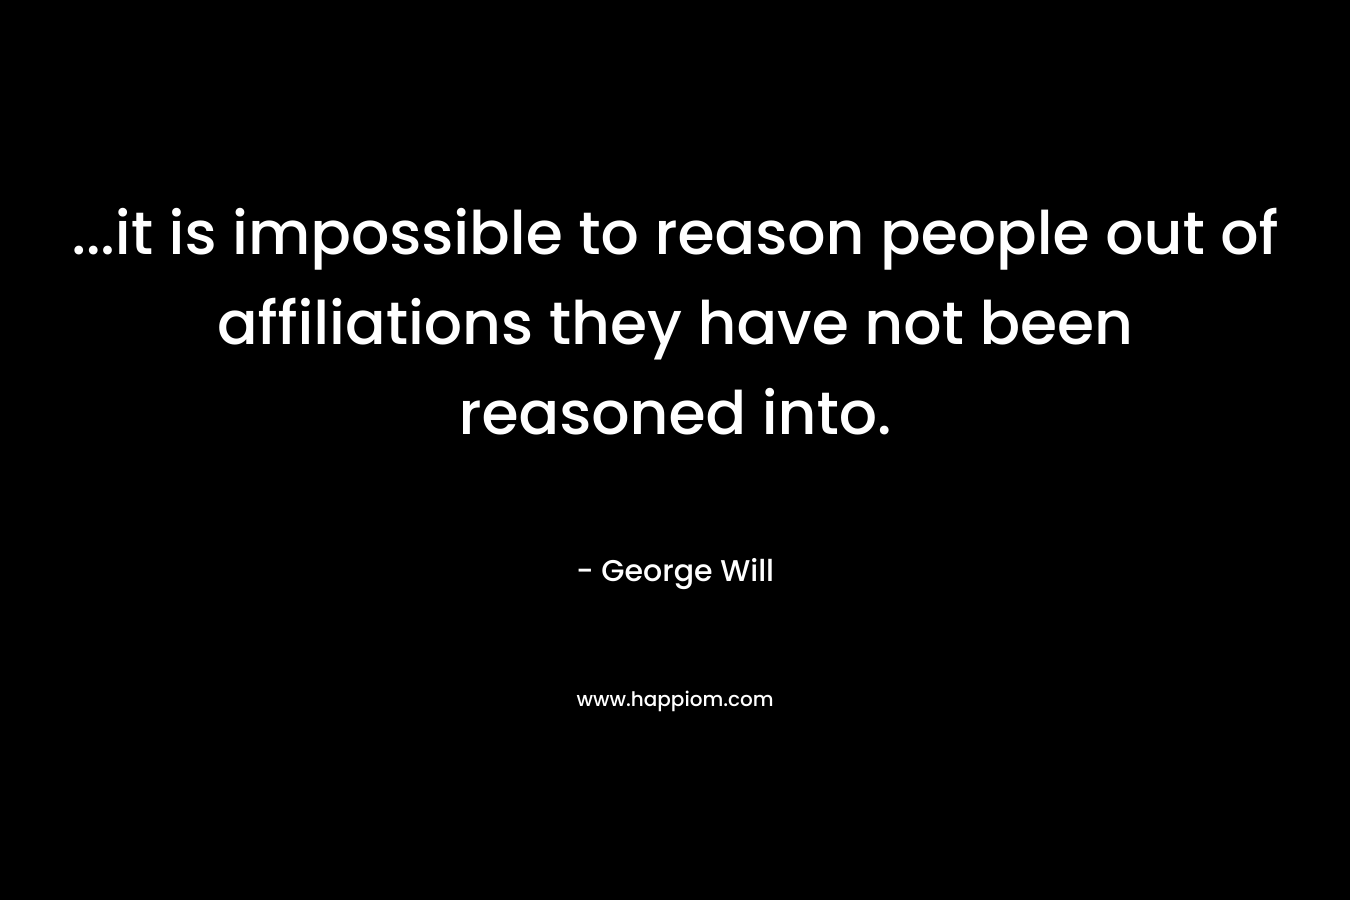 …it is impossible to reason people out of affiliations they have not been reasoned into. – George Will